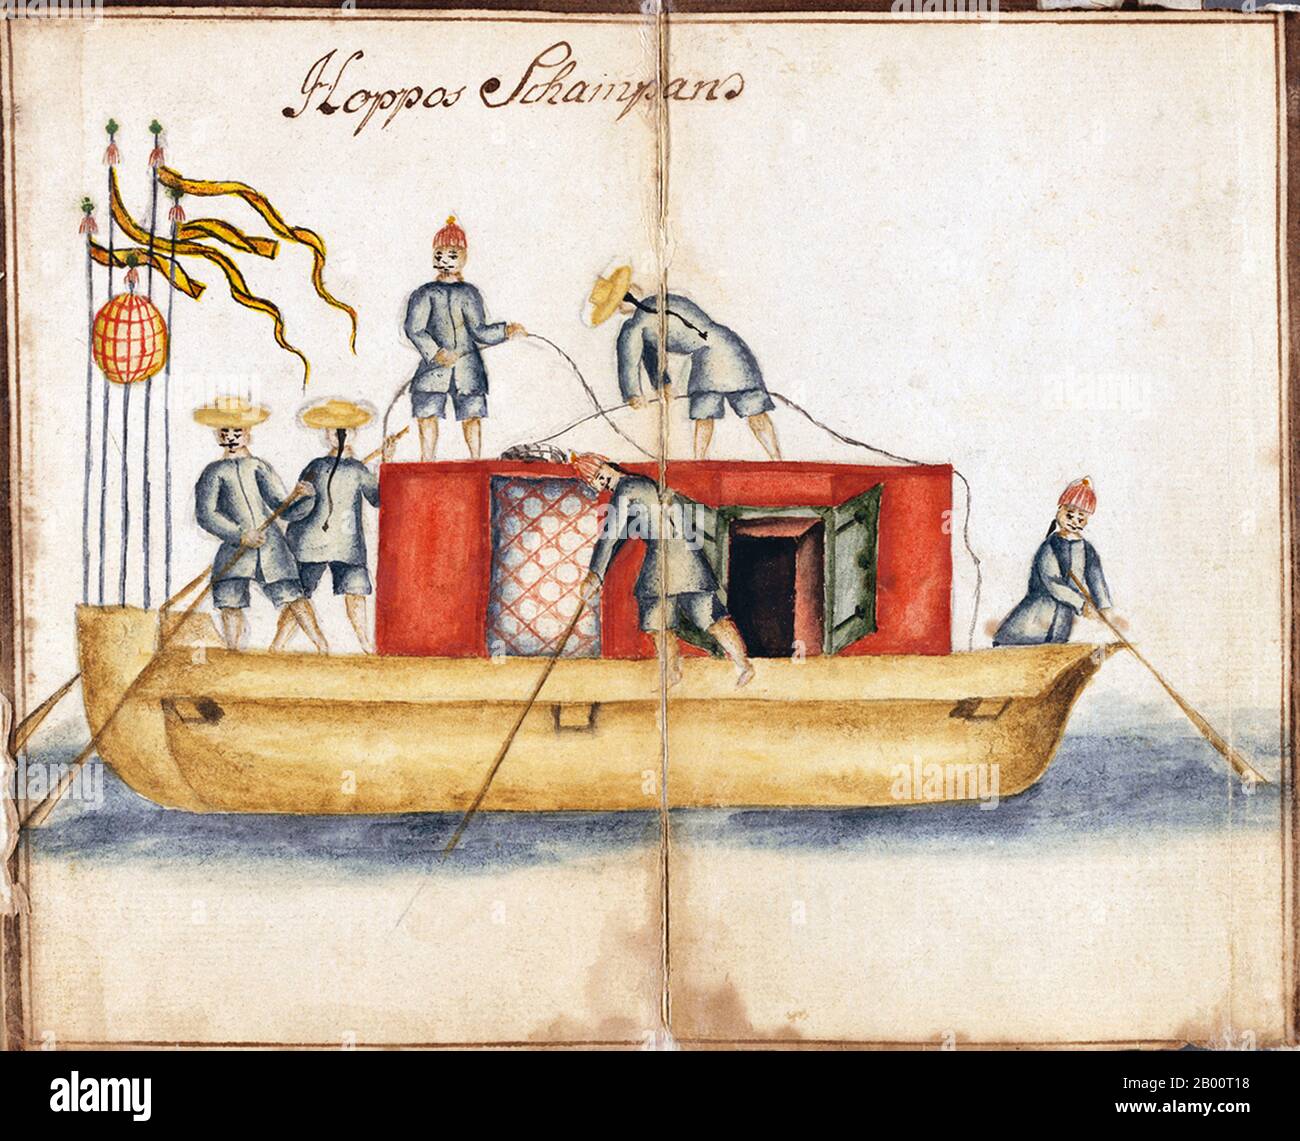 China/Sweden: Painting of the Hoppo's sampan, Canton (Guangzhou), c. 1749.  From 1746 to 1749, the Swedish ship Götha Lejon sailed on a mercantile mission to Canton. Several accounts of what transpired have survived. A handwritten journal has been attributed to Carl Fredrik von Schantz (1727-92). Another account of the mission of Götha Lejon was compiled by Carl Johan Gethe (1728-65), a cartographer and natural historian. His diary is titled ‘Diary of a Journey to East India begun on 18 October 1746 and ending June 20, 1749’. The Swedish East India Company (SOIC) was founded in 1731. Stock Photo